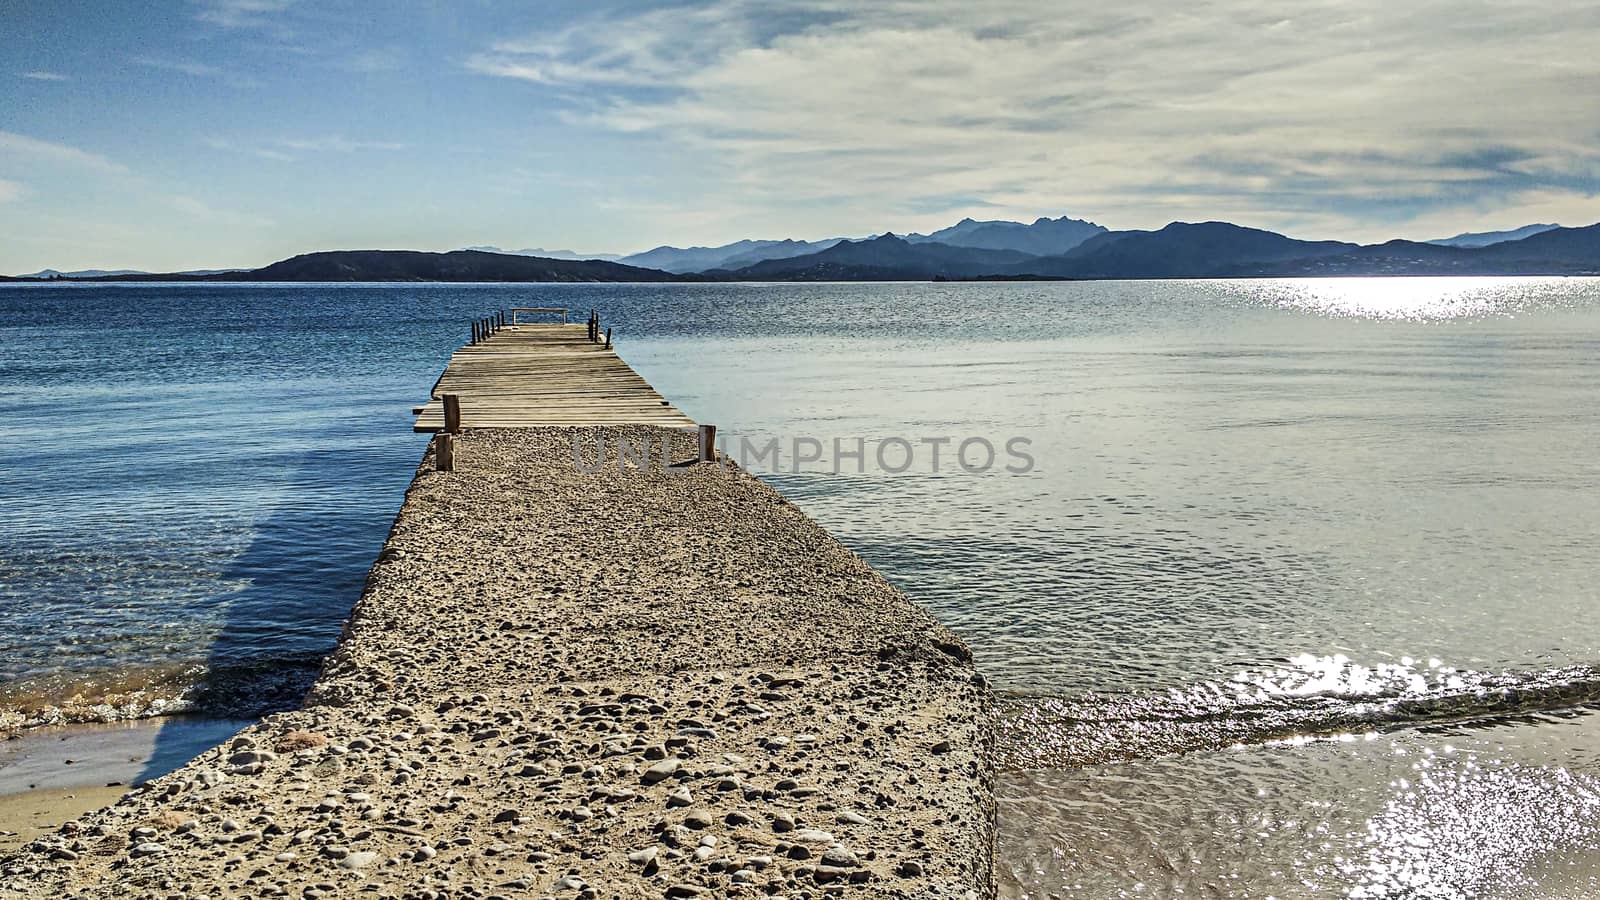 An old little pier proceeds for a few meters on the calm waters  by robbyfontanesi